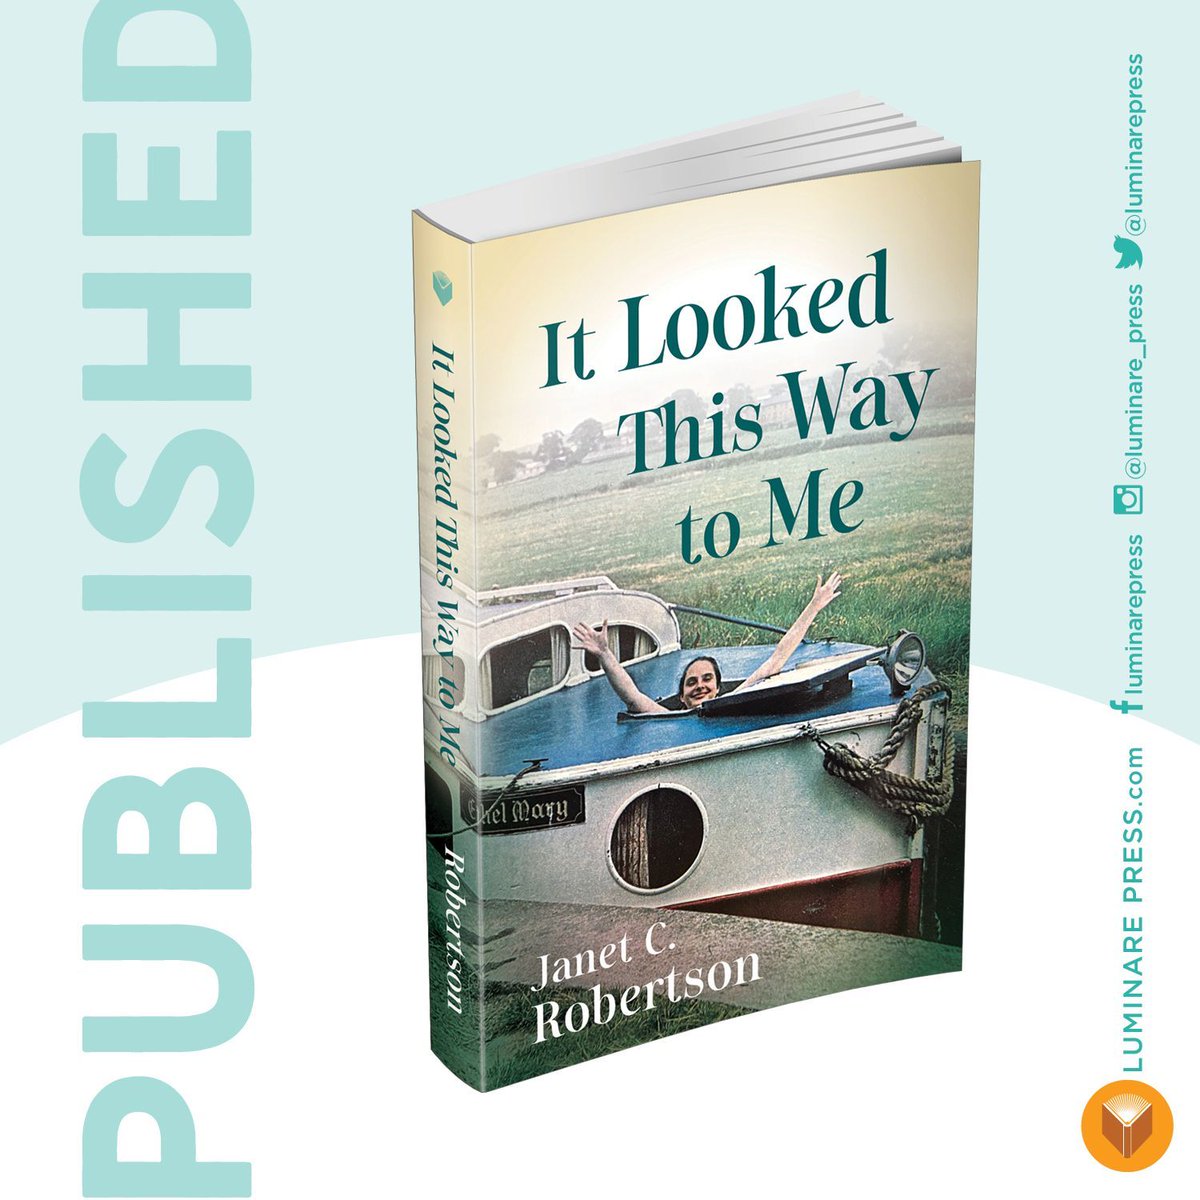 It Looked This Way to Me
by Janet C. Robertson
Growing up in the 1940’s in New York’s Jewish Community, Janet Cohen, an only child, buff.ly/4bmvBnu 
 
#memoir #personalmemoir #NewYork #JewishCommunity #ad #selfpublishing #luminarepress #books #authorlife #indieauthors